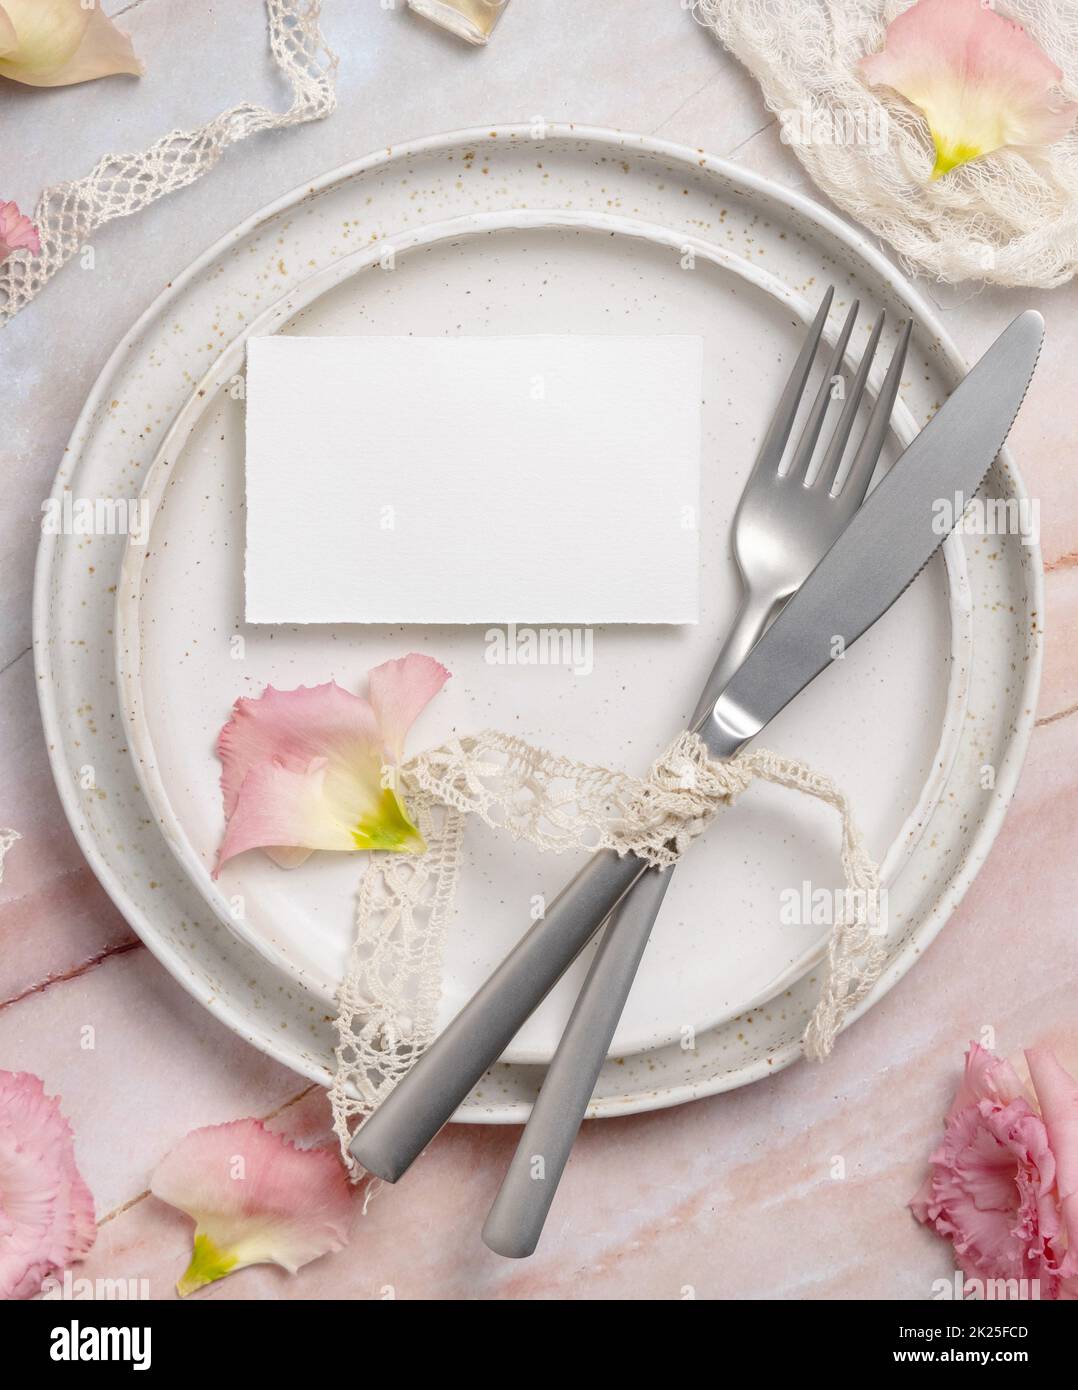 Wedding place card laying on a ceramic plate on a marble table Stock Photo